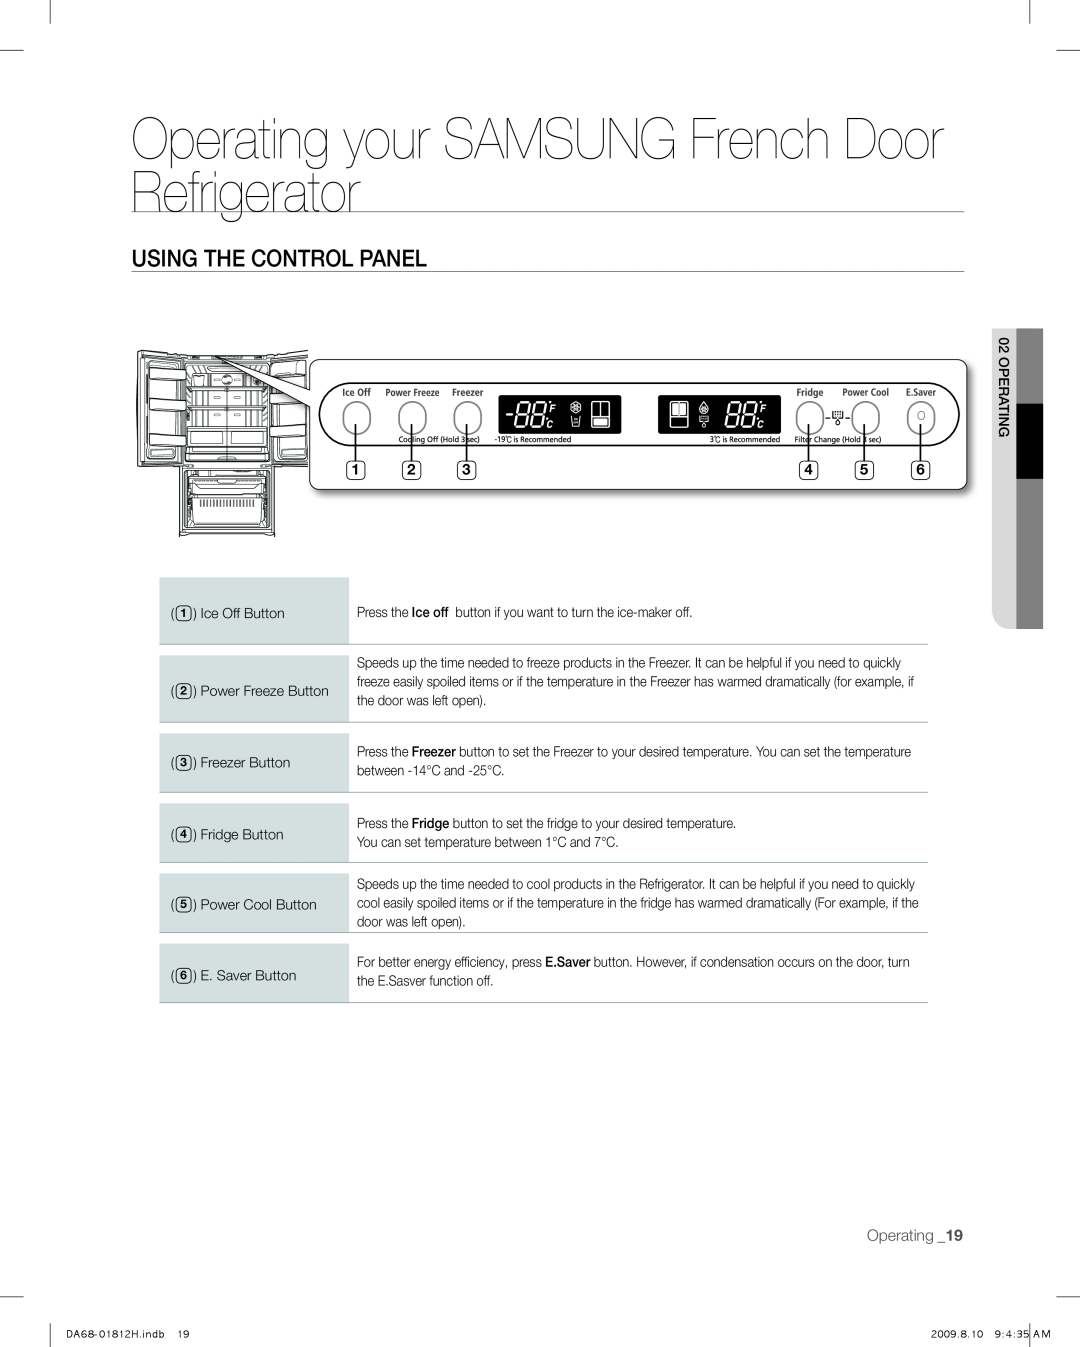 Samsung RF266AFBP, RF263AFBP Operating your SAMSUNG French Door Refrigerator, Using the control panel, Operating _19 